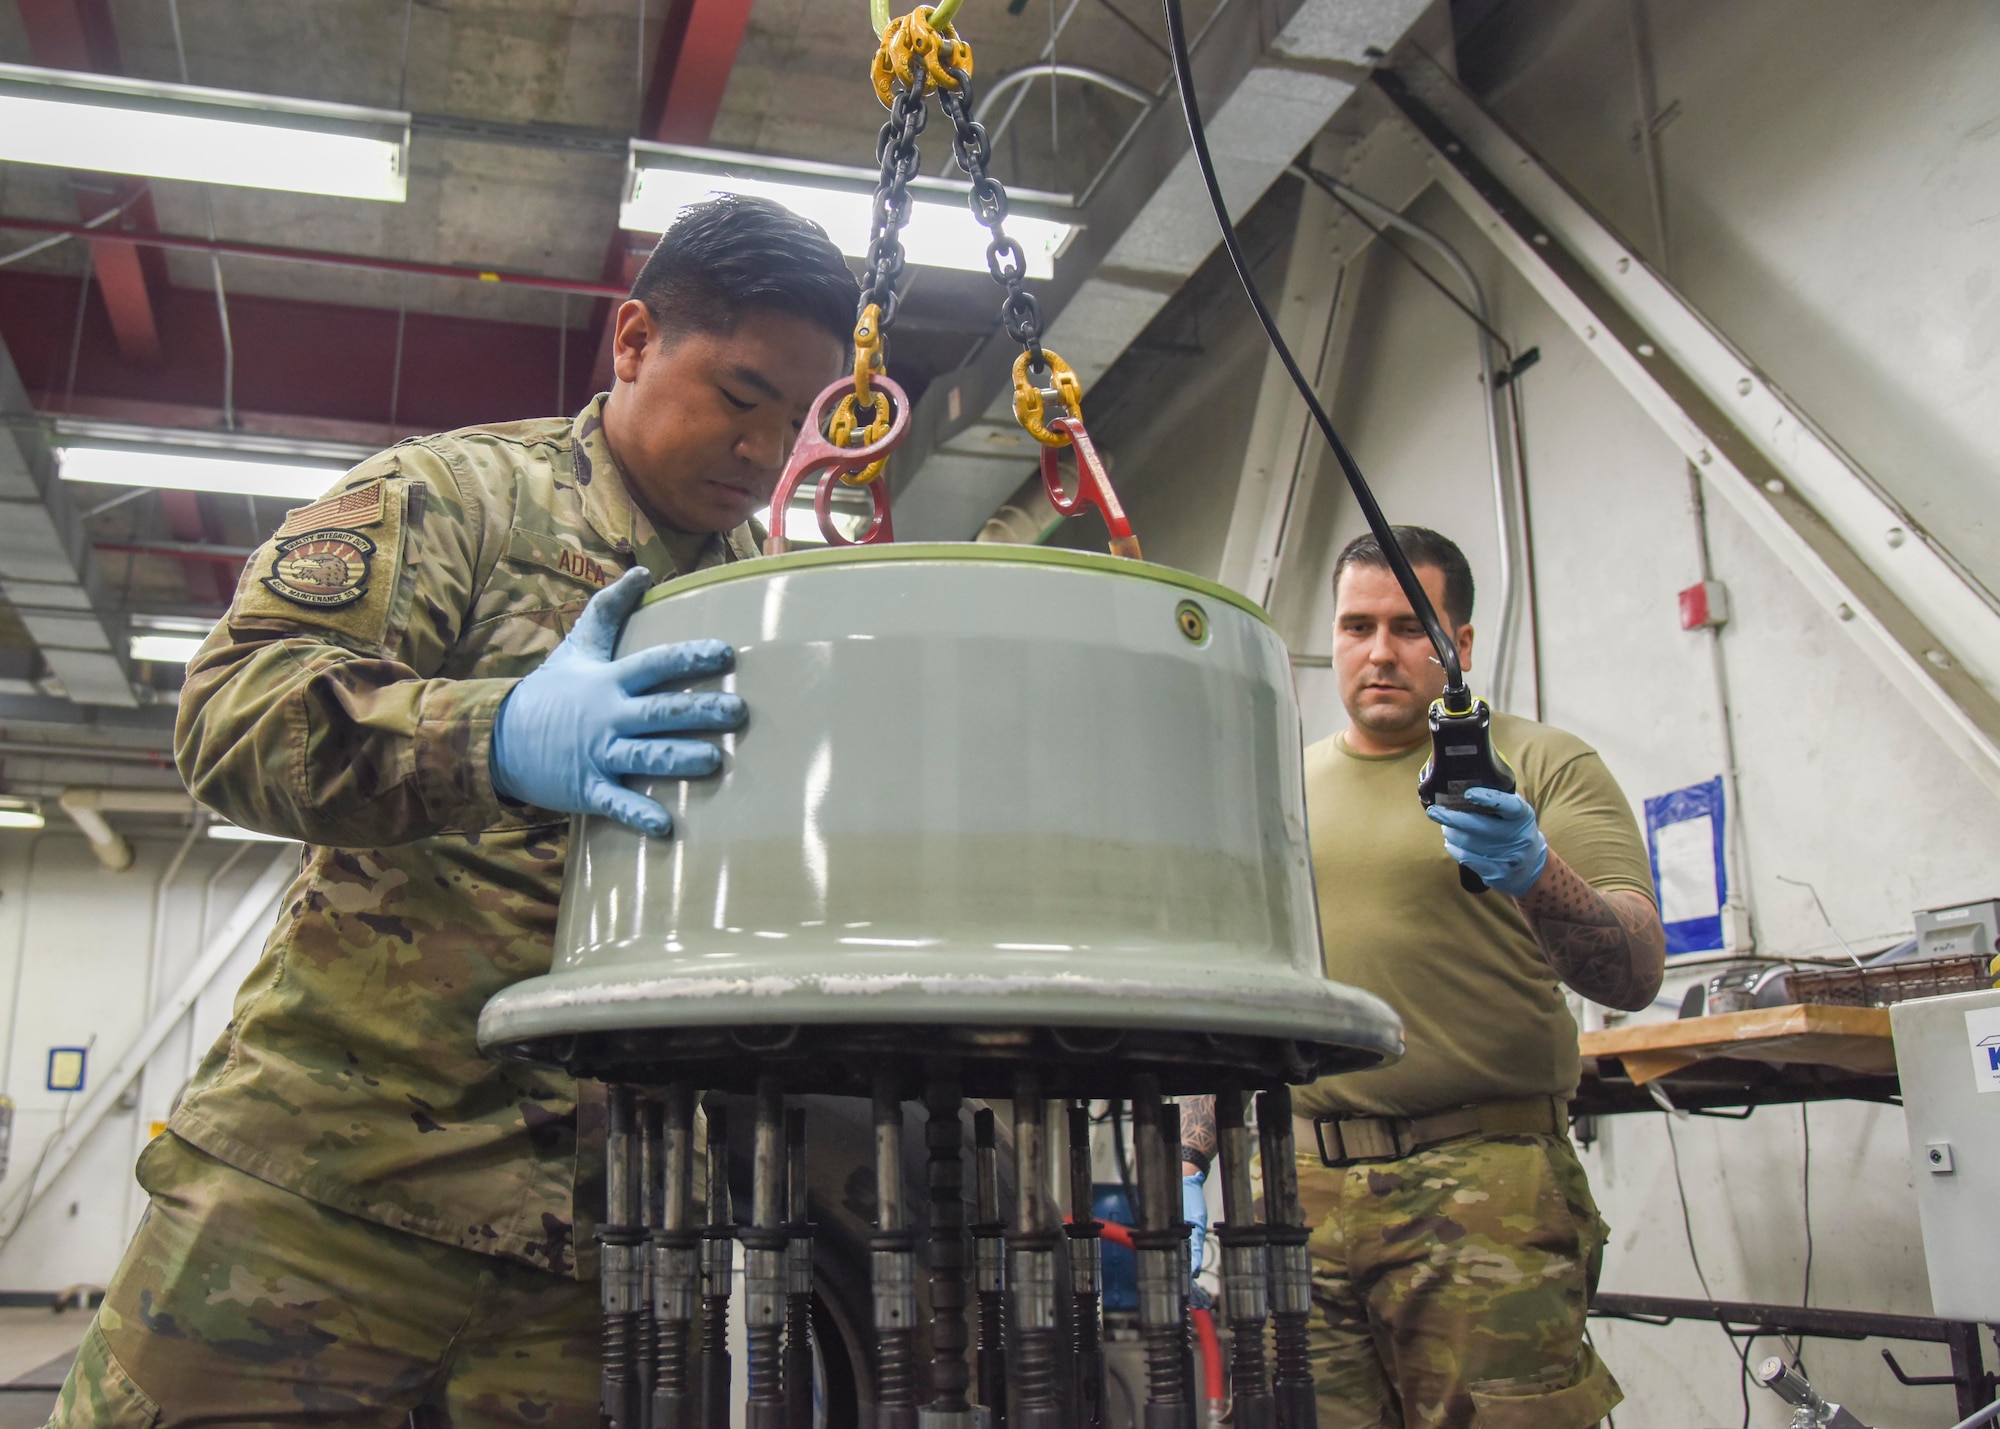 (left) U.S. Air Force Staff Sgt. Lester Adea, 452nd Maintenance Squadron repair and reclamation maintainer, and (right) U.S. Air Force Staff Sgt. Kyle Hauck, 912th Air Refueling Squadron repair and reclamation maintainer, operate a machine to repair a tire at March Air Reserve Base, California, July 15, 2021.